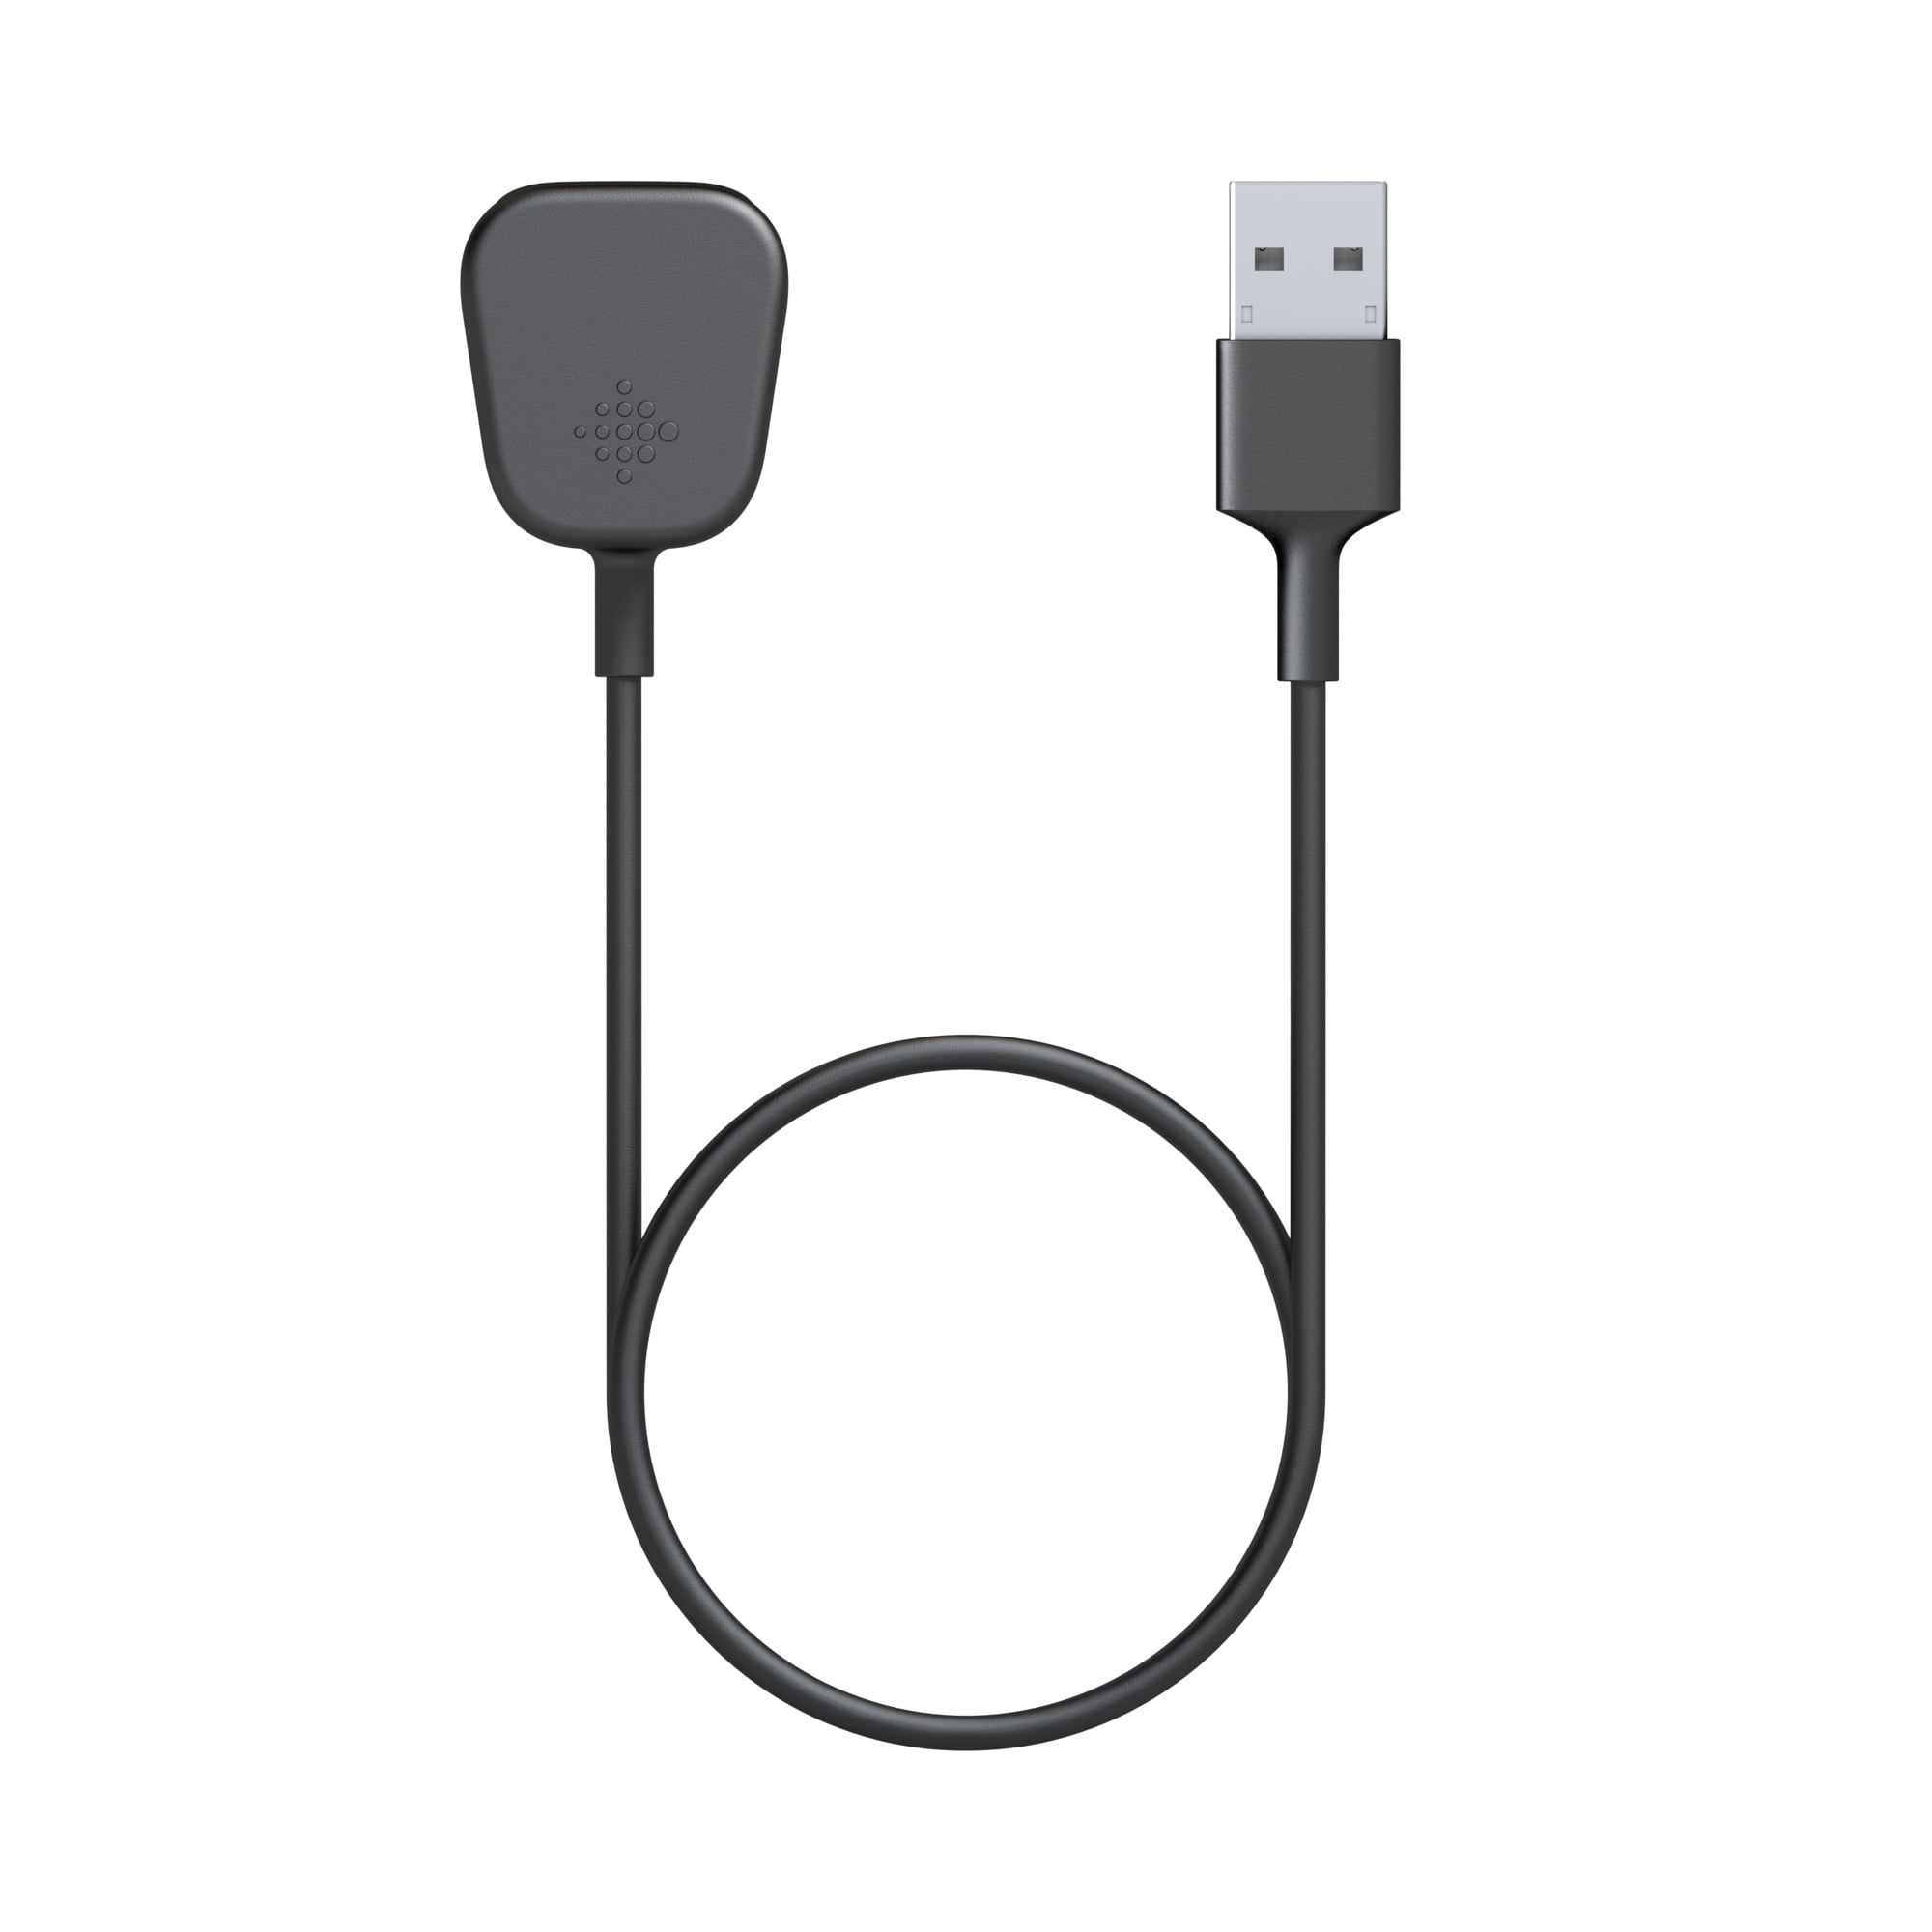 Fitbit Charging Cable for Charge 3 Activity Tracker Genuine New 